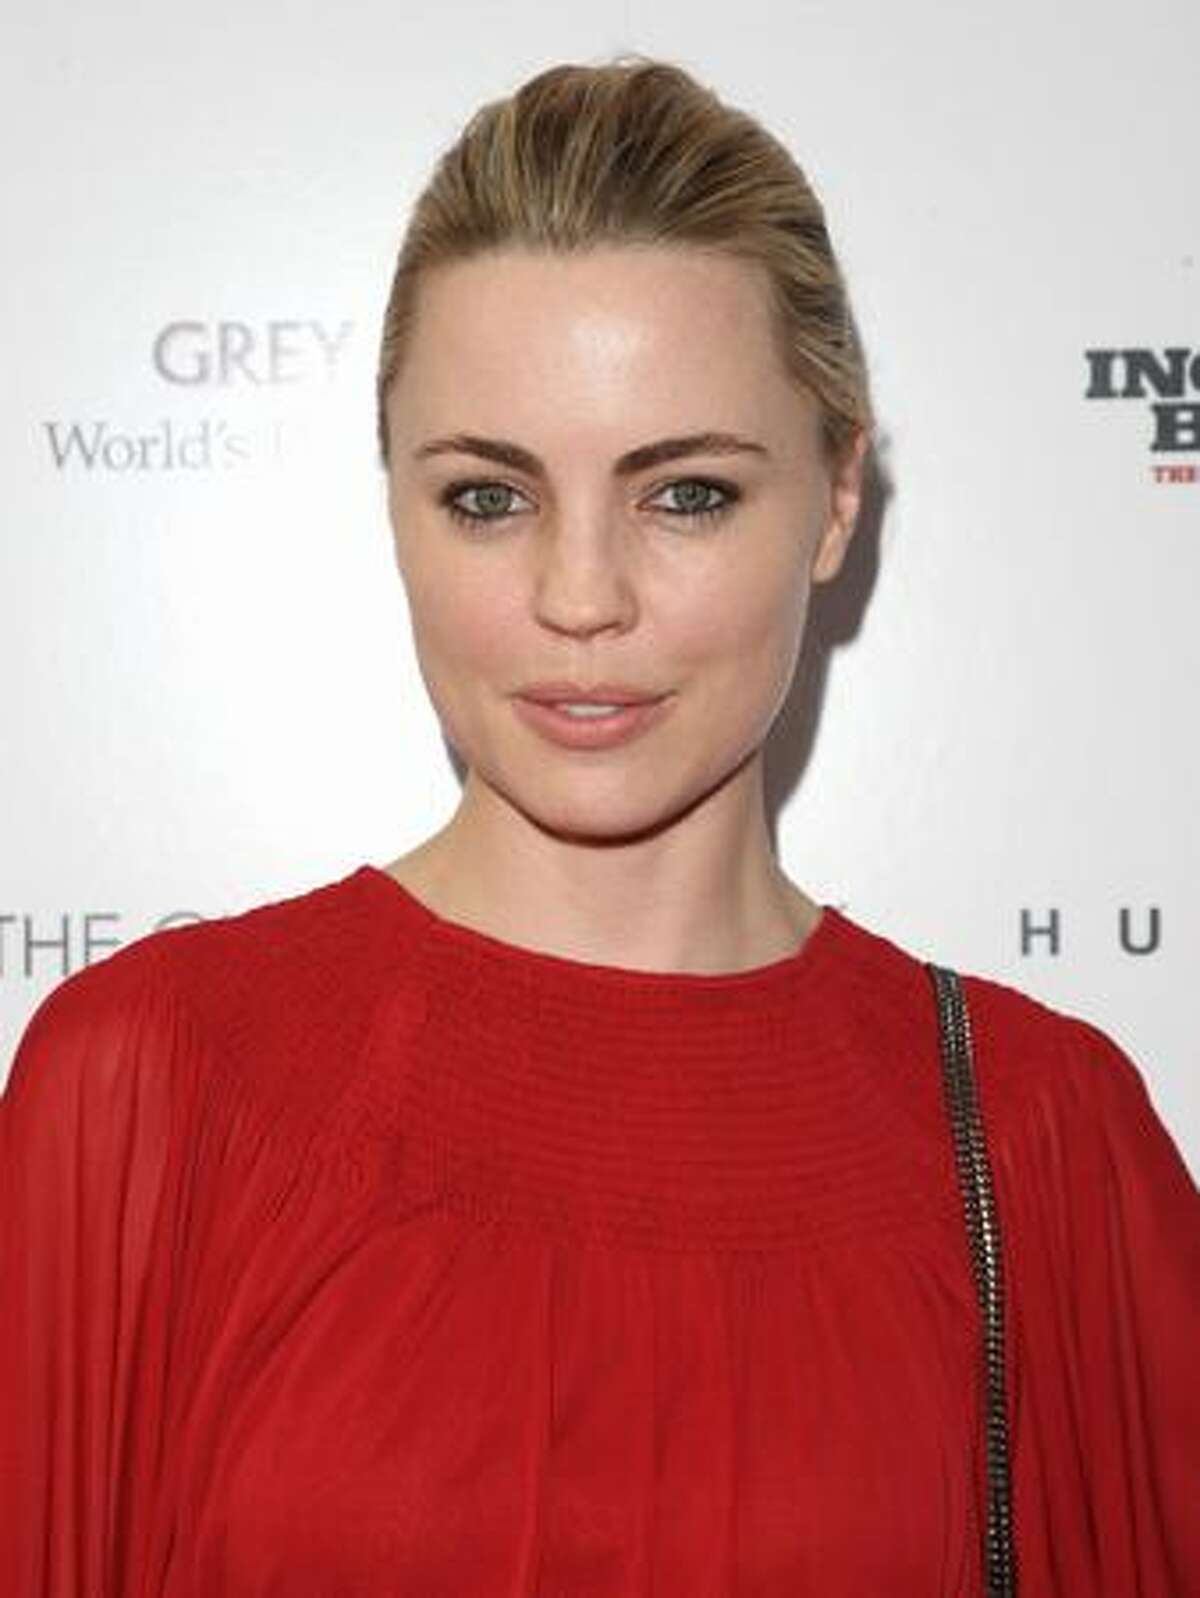 Actress Melissa George attends The Cinema Society & Hugo Boss screening of "Inglourious Basterds" at SVA Theater in New York City.